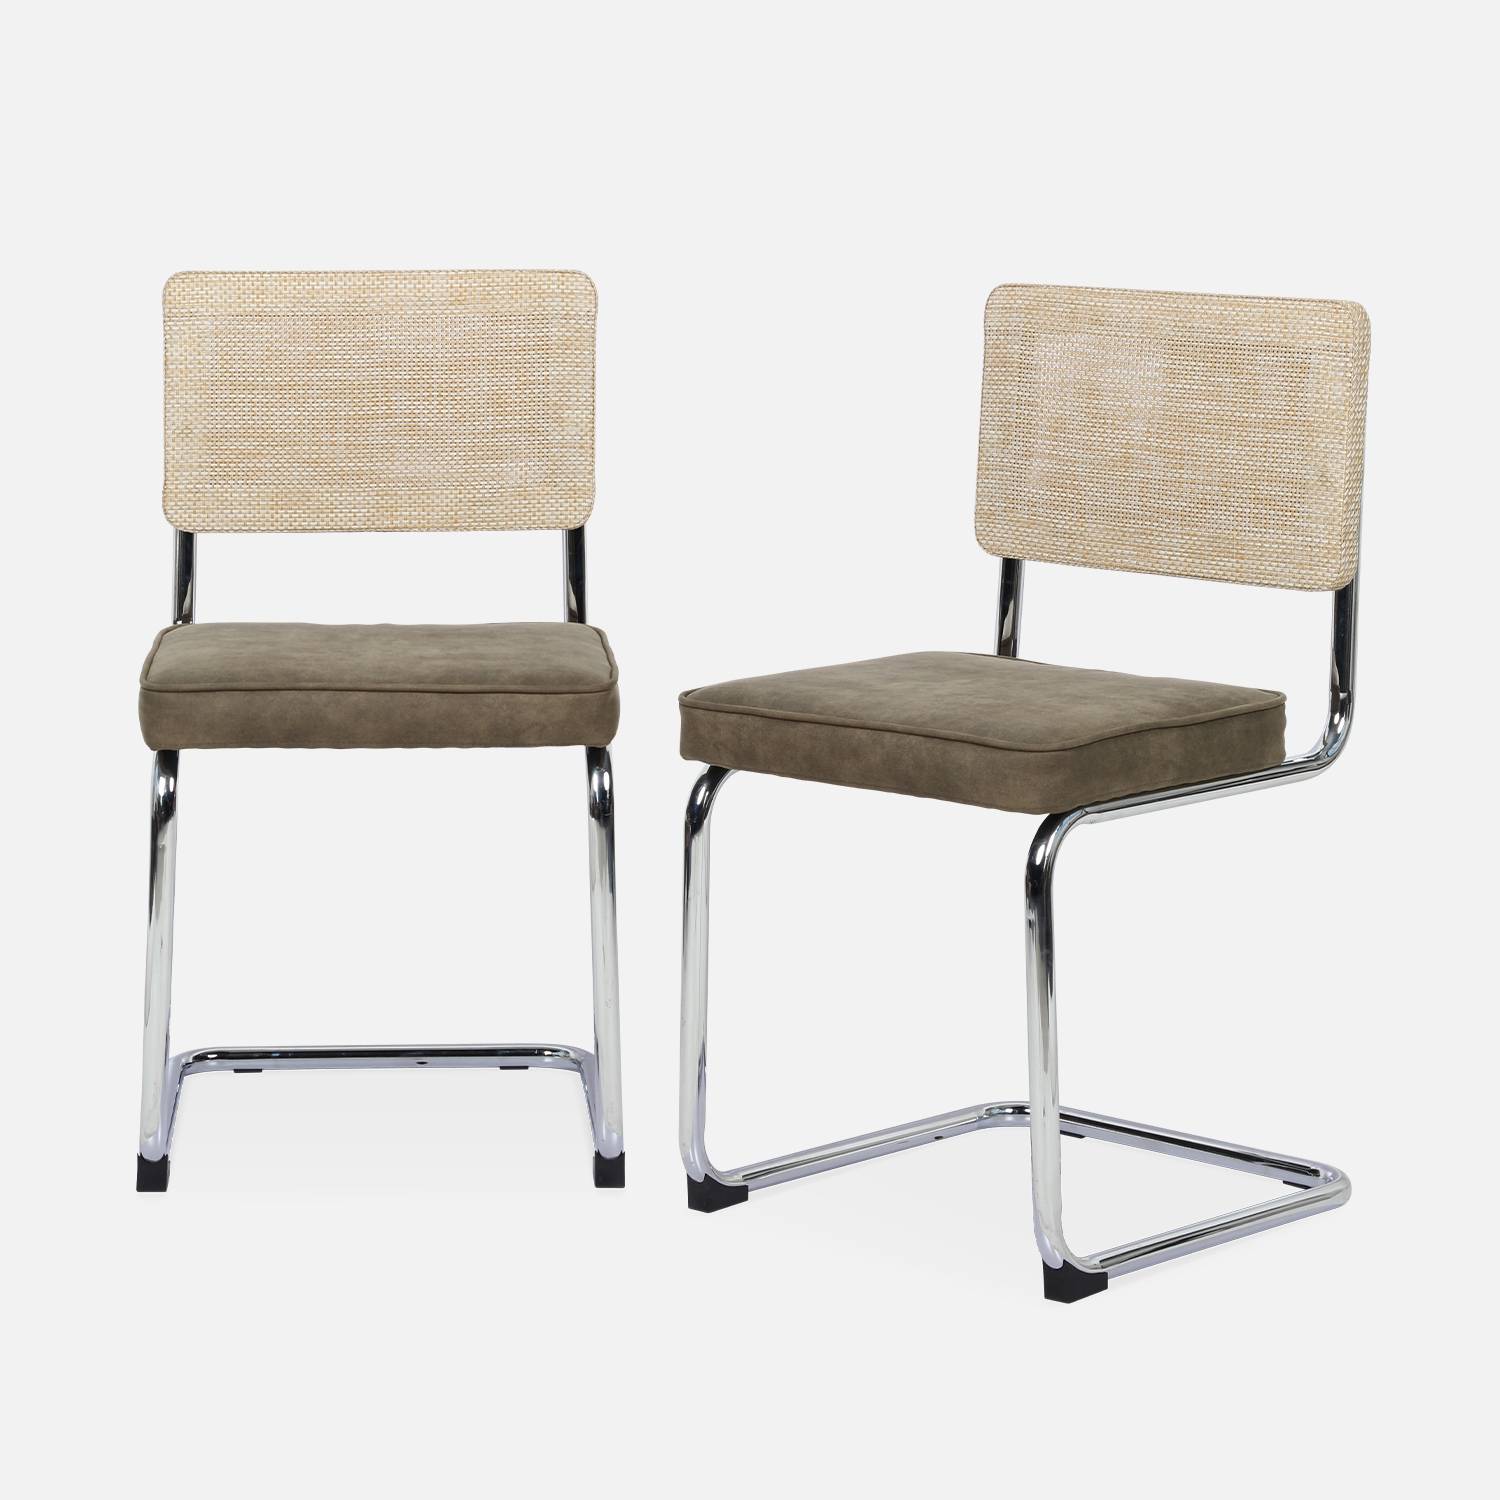 Pair of cantilever cane rattan dining chairs, 46x54.5x84.5cm, Taupe | sweeek